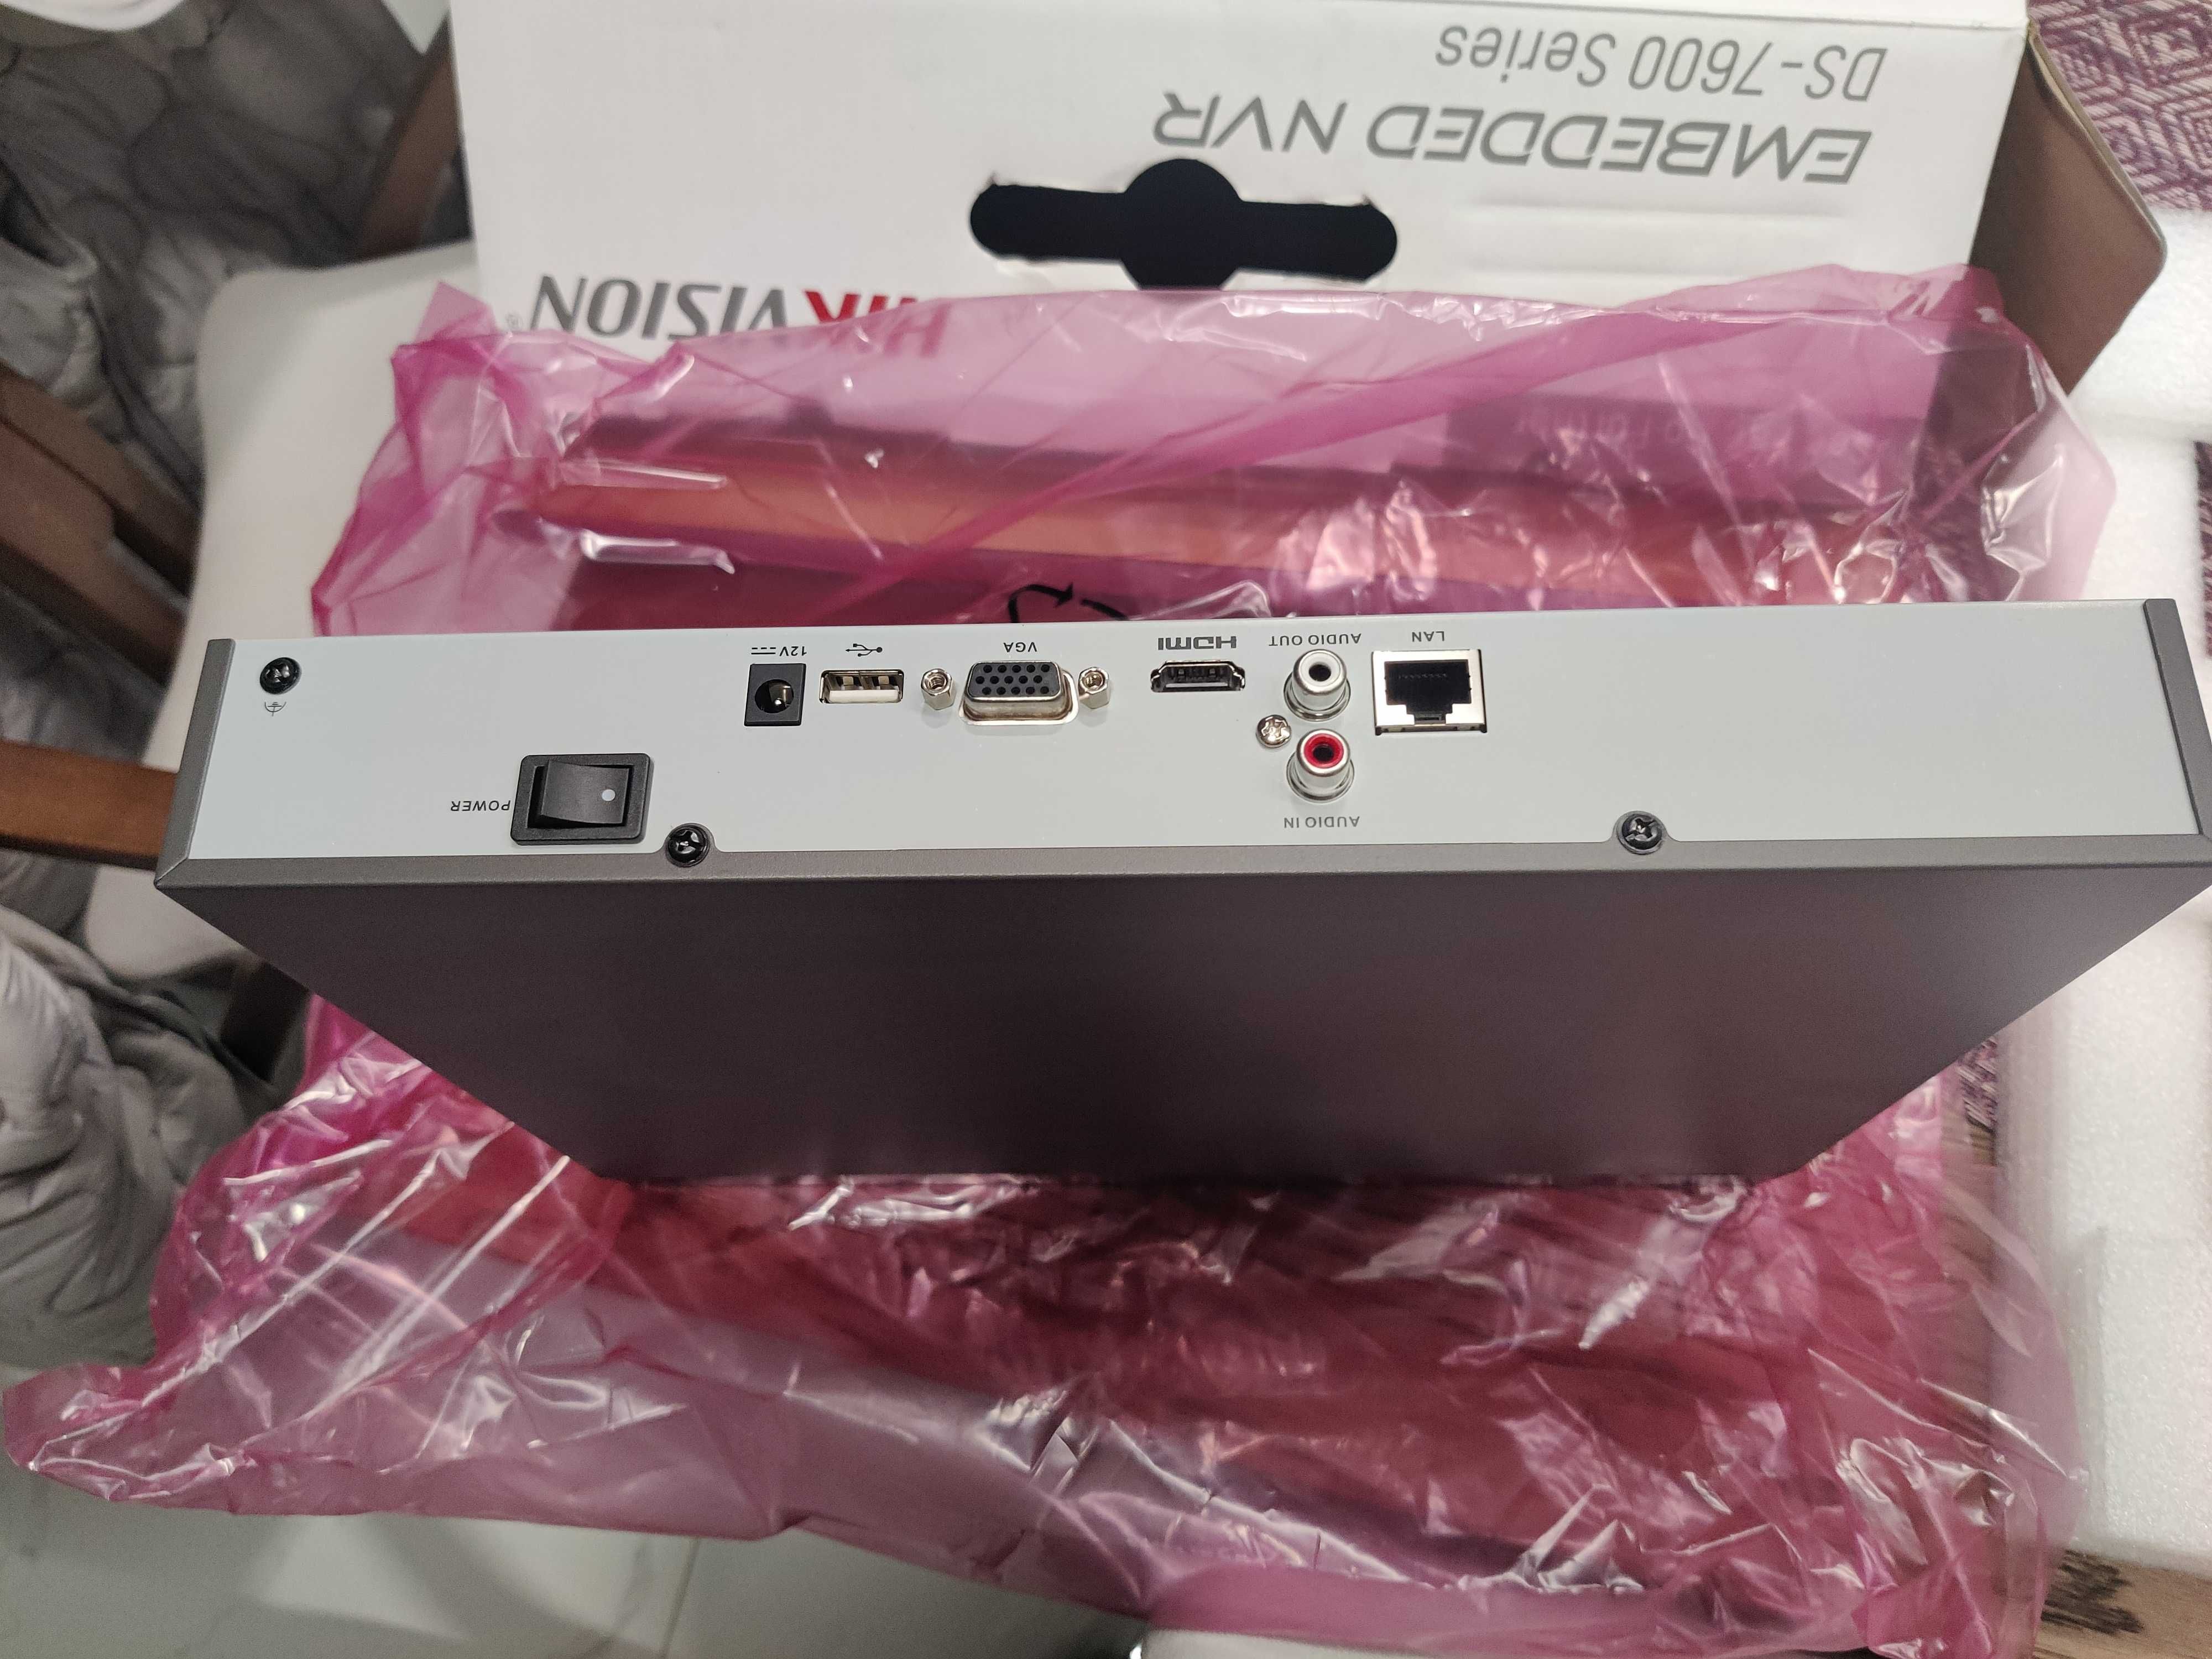 Embedded NVR Hikvision DS-7600 Seeies